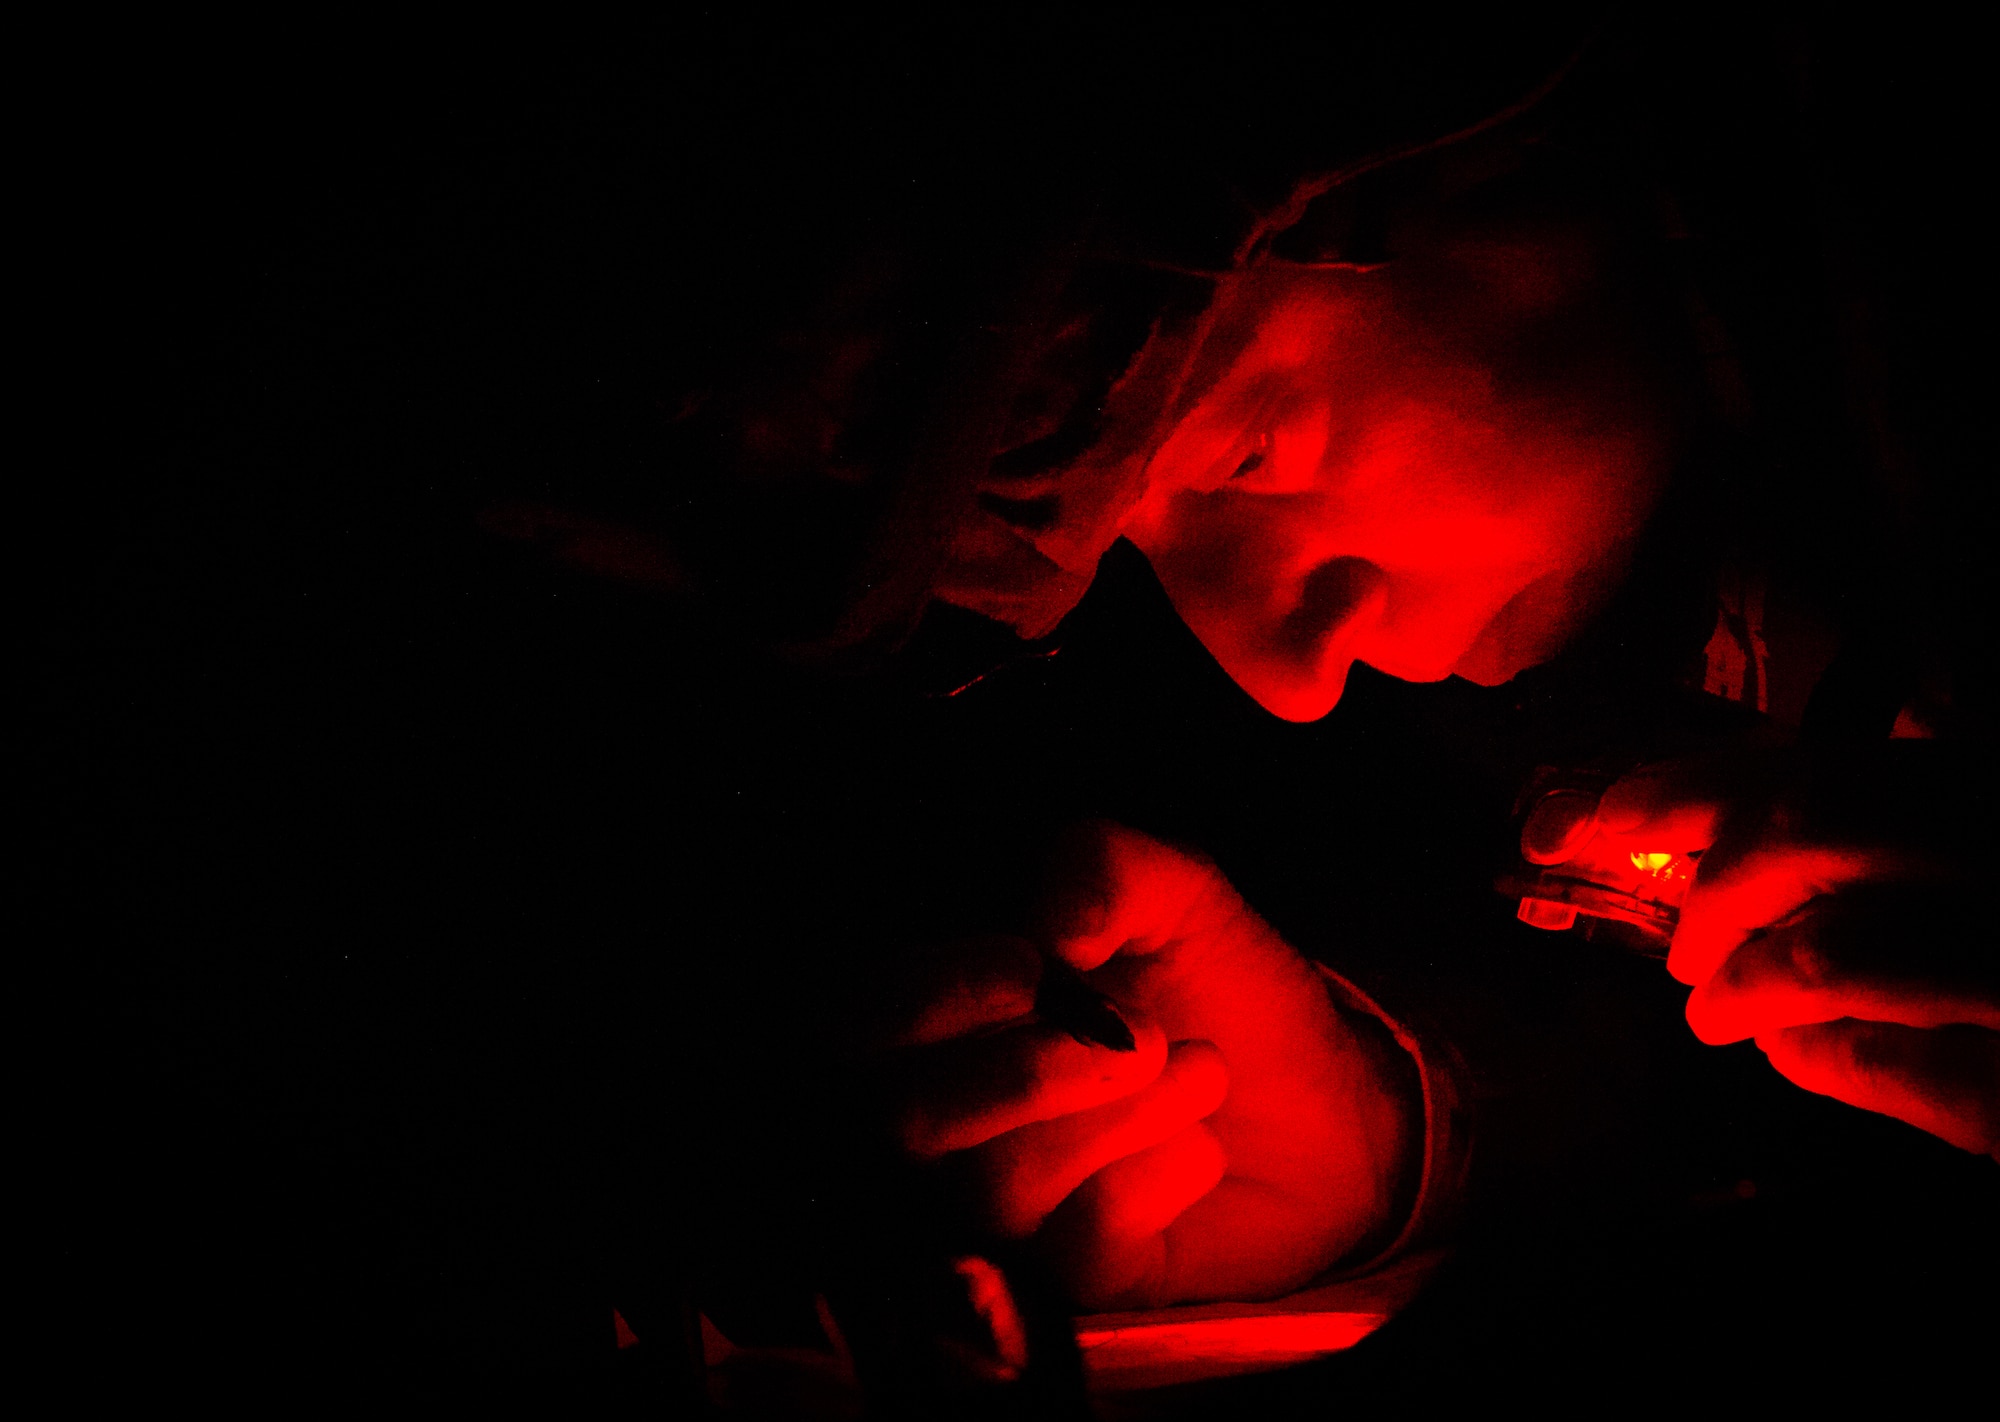 Lt. Col. Erin Hutchinson, 446th Aeromedical Staging Squadron Expert Field Medic Badge candidate, plots points on a map under a tarp during the rain while being restricted to only using a red light flashlight before the night land navigation test during the EFMB course at Joint Base Lewis-McChord, Wash., Sept. 25, 2015. Every year airmen and soldiers attempt to pass the EFMB course where less than 20 percent of all candidates leave successful. (U.S. Air Force photo by Senior Airman Jordan Castelan/Released)